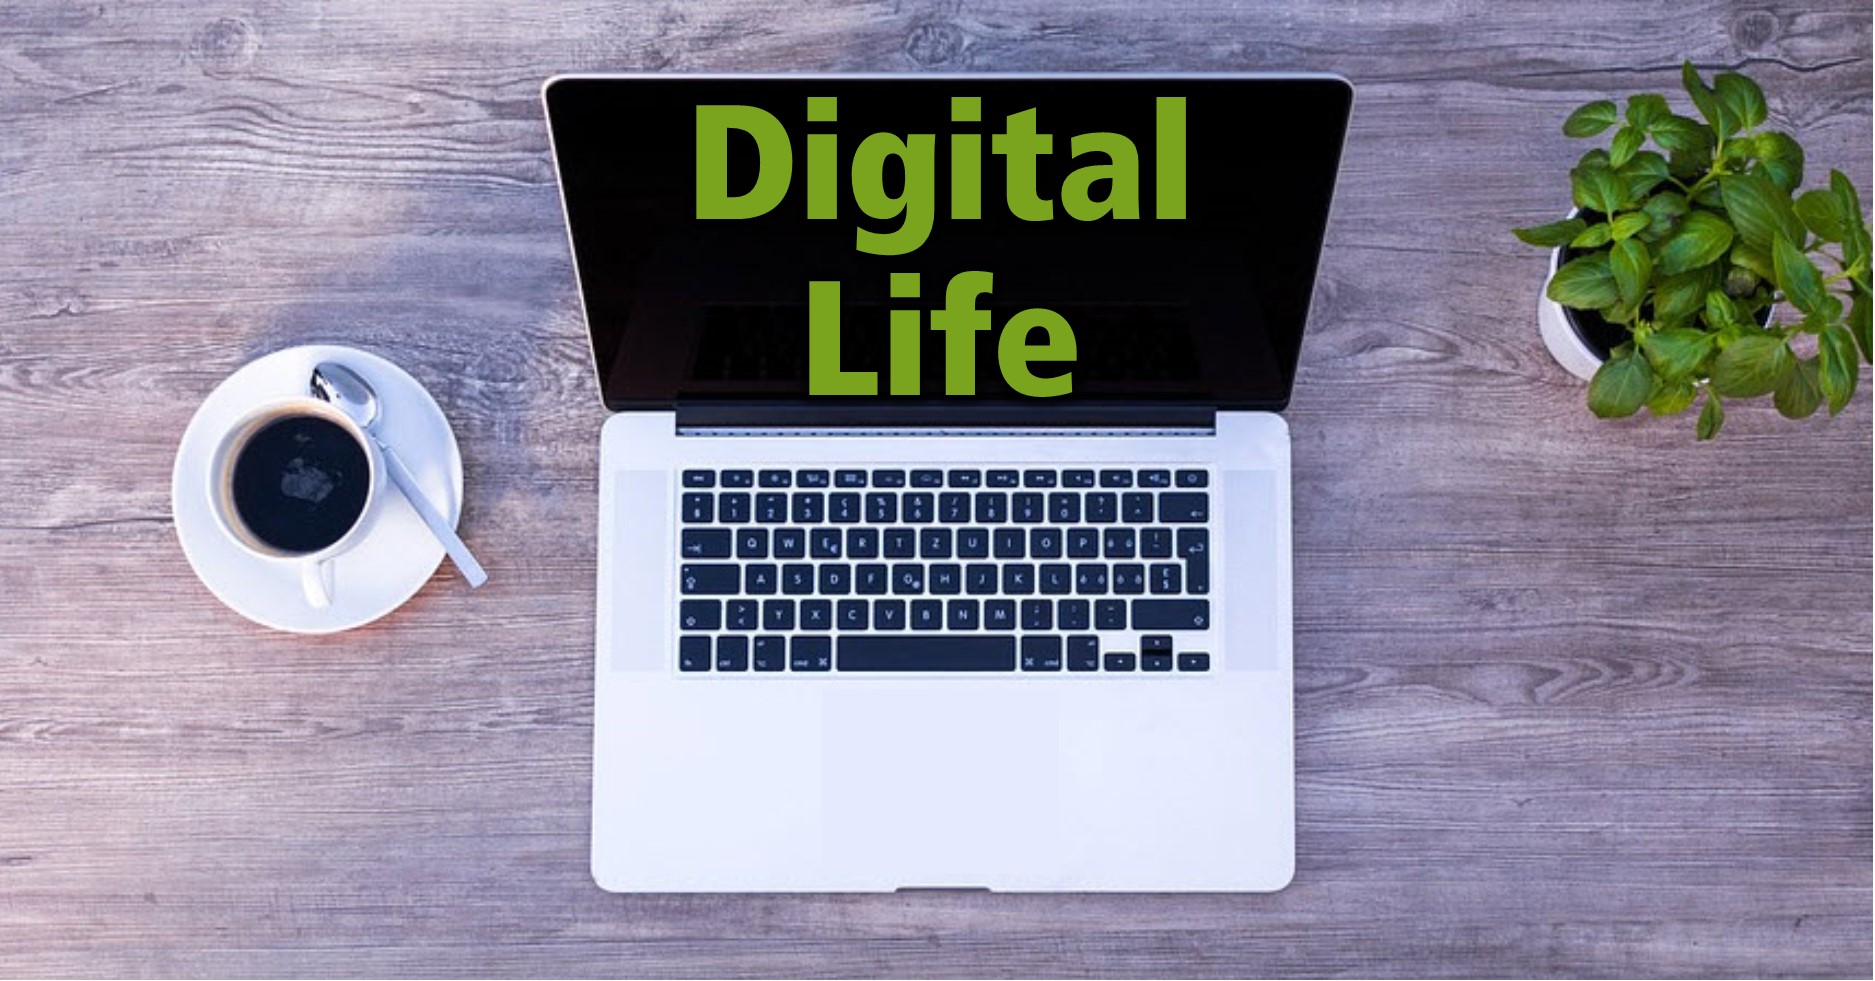 Open laptop and cup of coffee, with text that says "Digital Life"